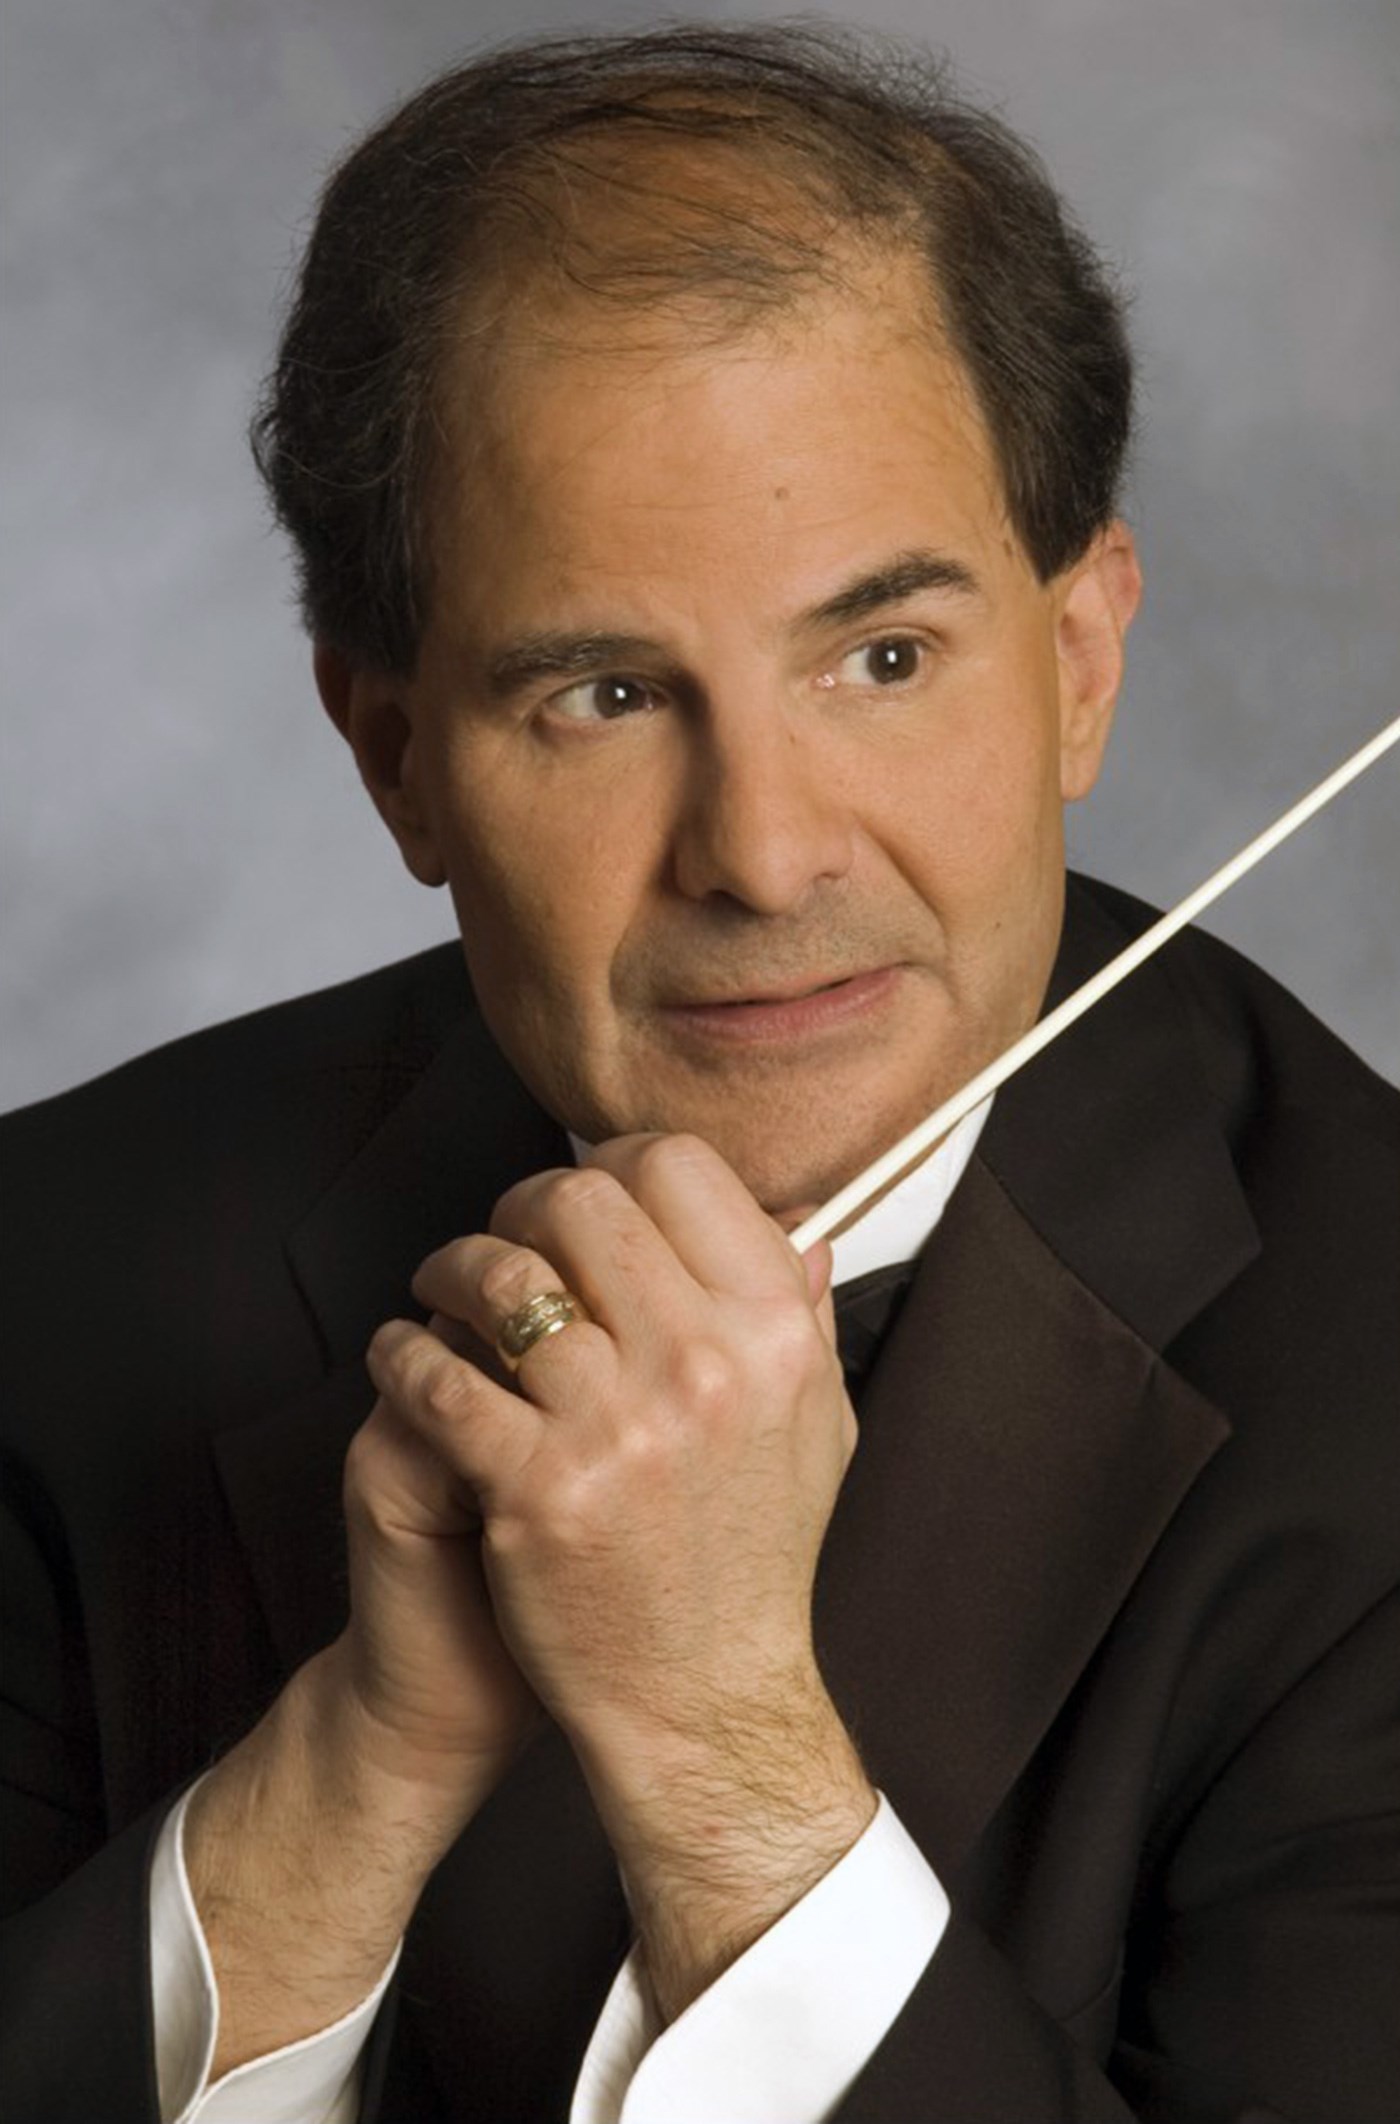 David Martins is a Professor Emeritus in the Music Dept. at UMass Lowell.